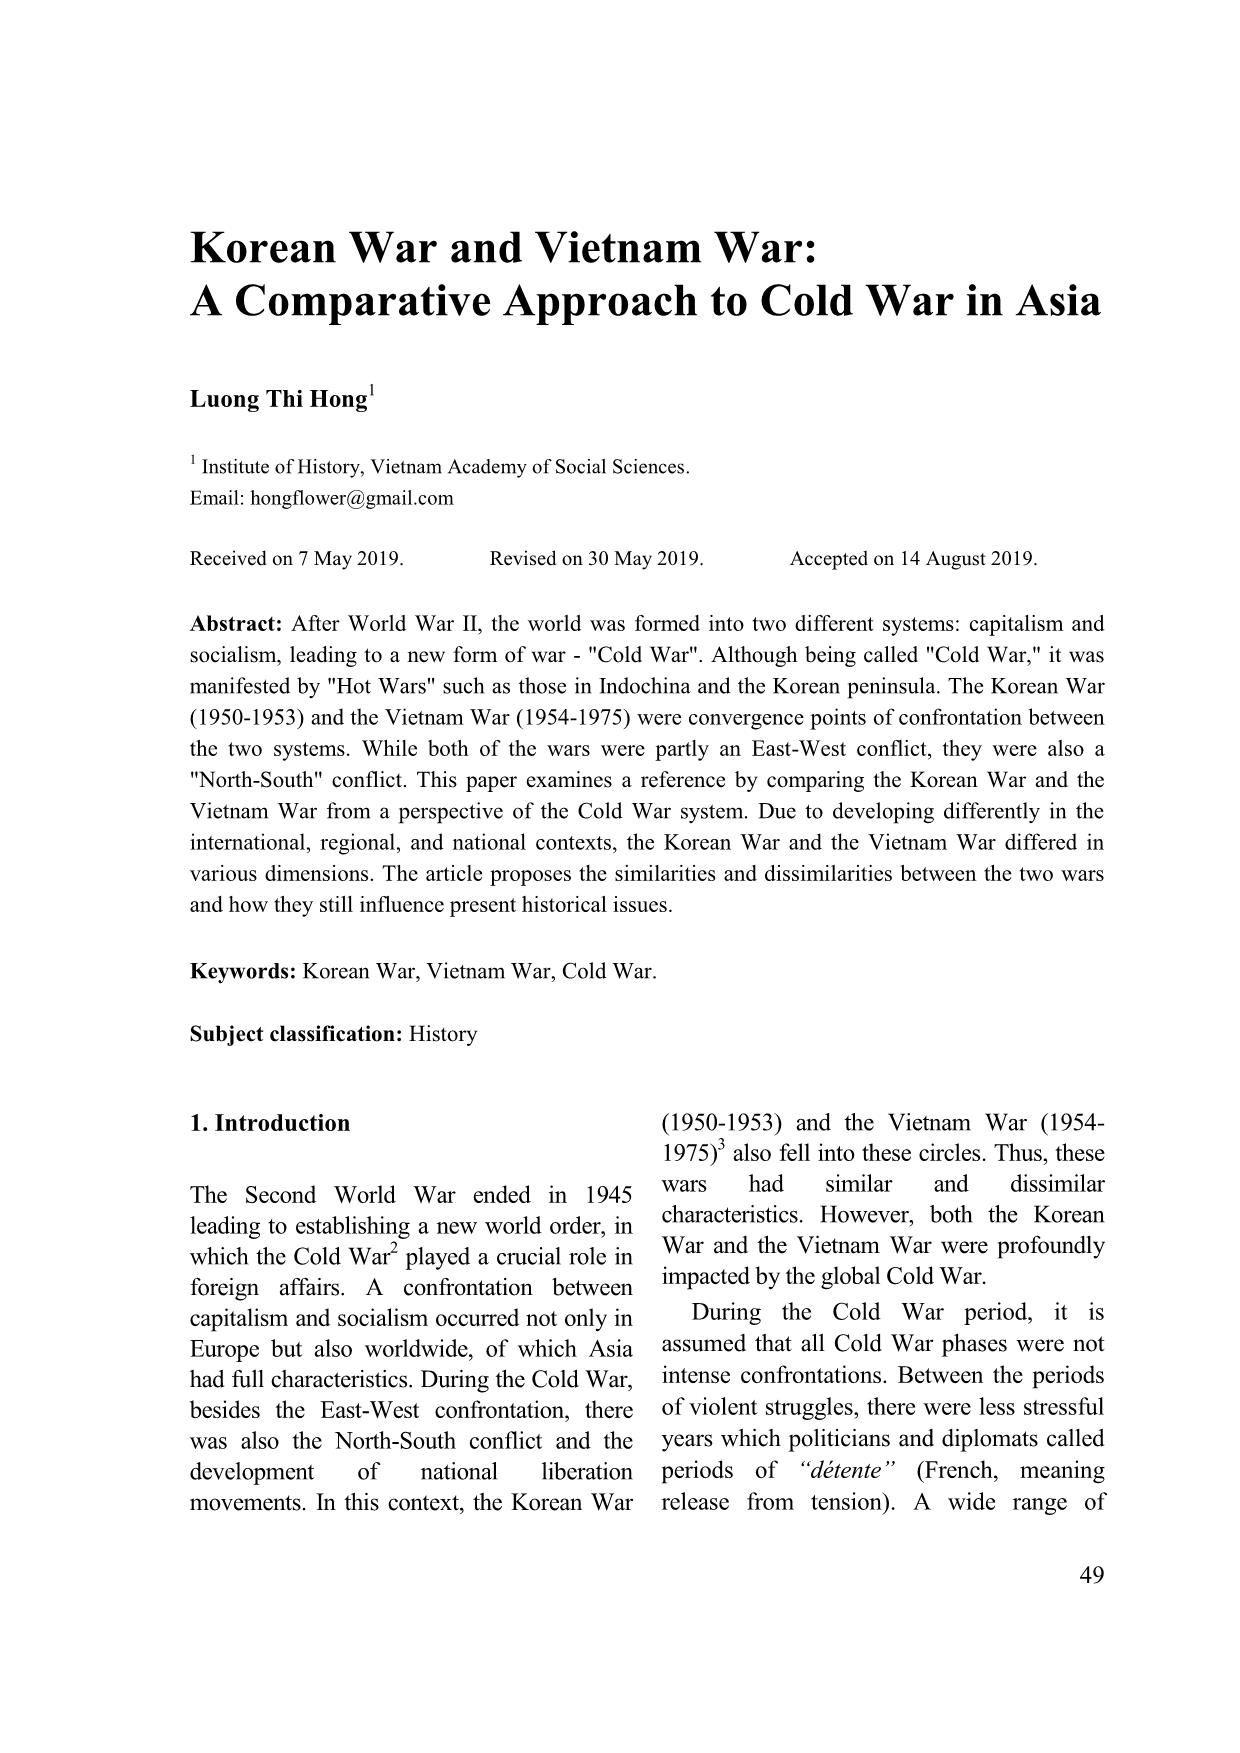 Korean war and Vietnam war: A comparative approach to cold war in Asia trang 1